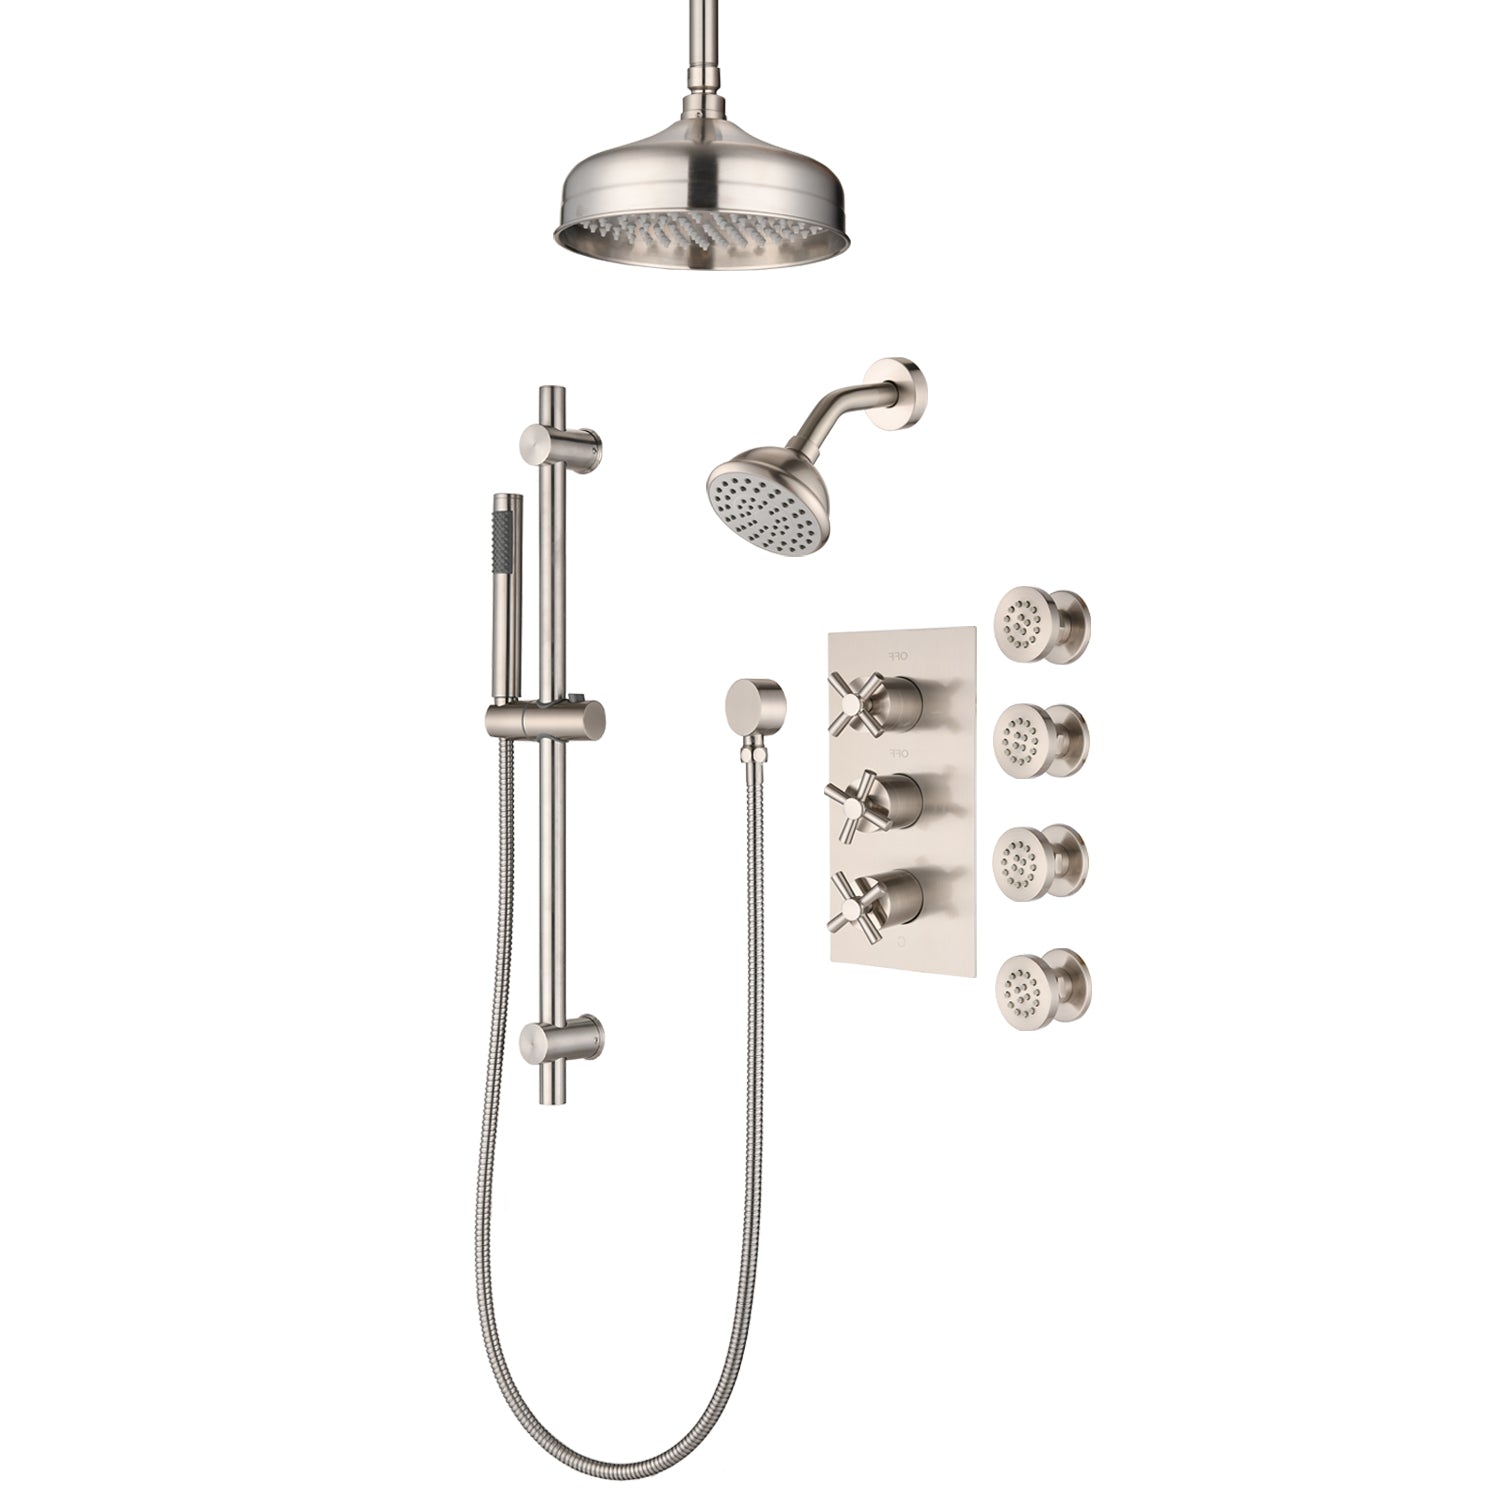 Boyel Living 1.8 GPM Wall Mount and Ceiling Mount Shower System with 4 Body Sprays in Brushed Nickel-Boyel Living